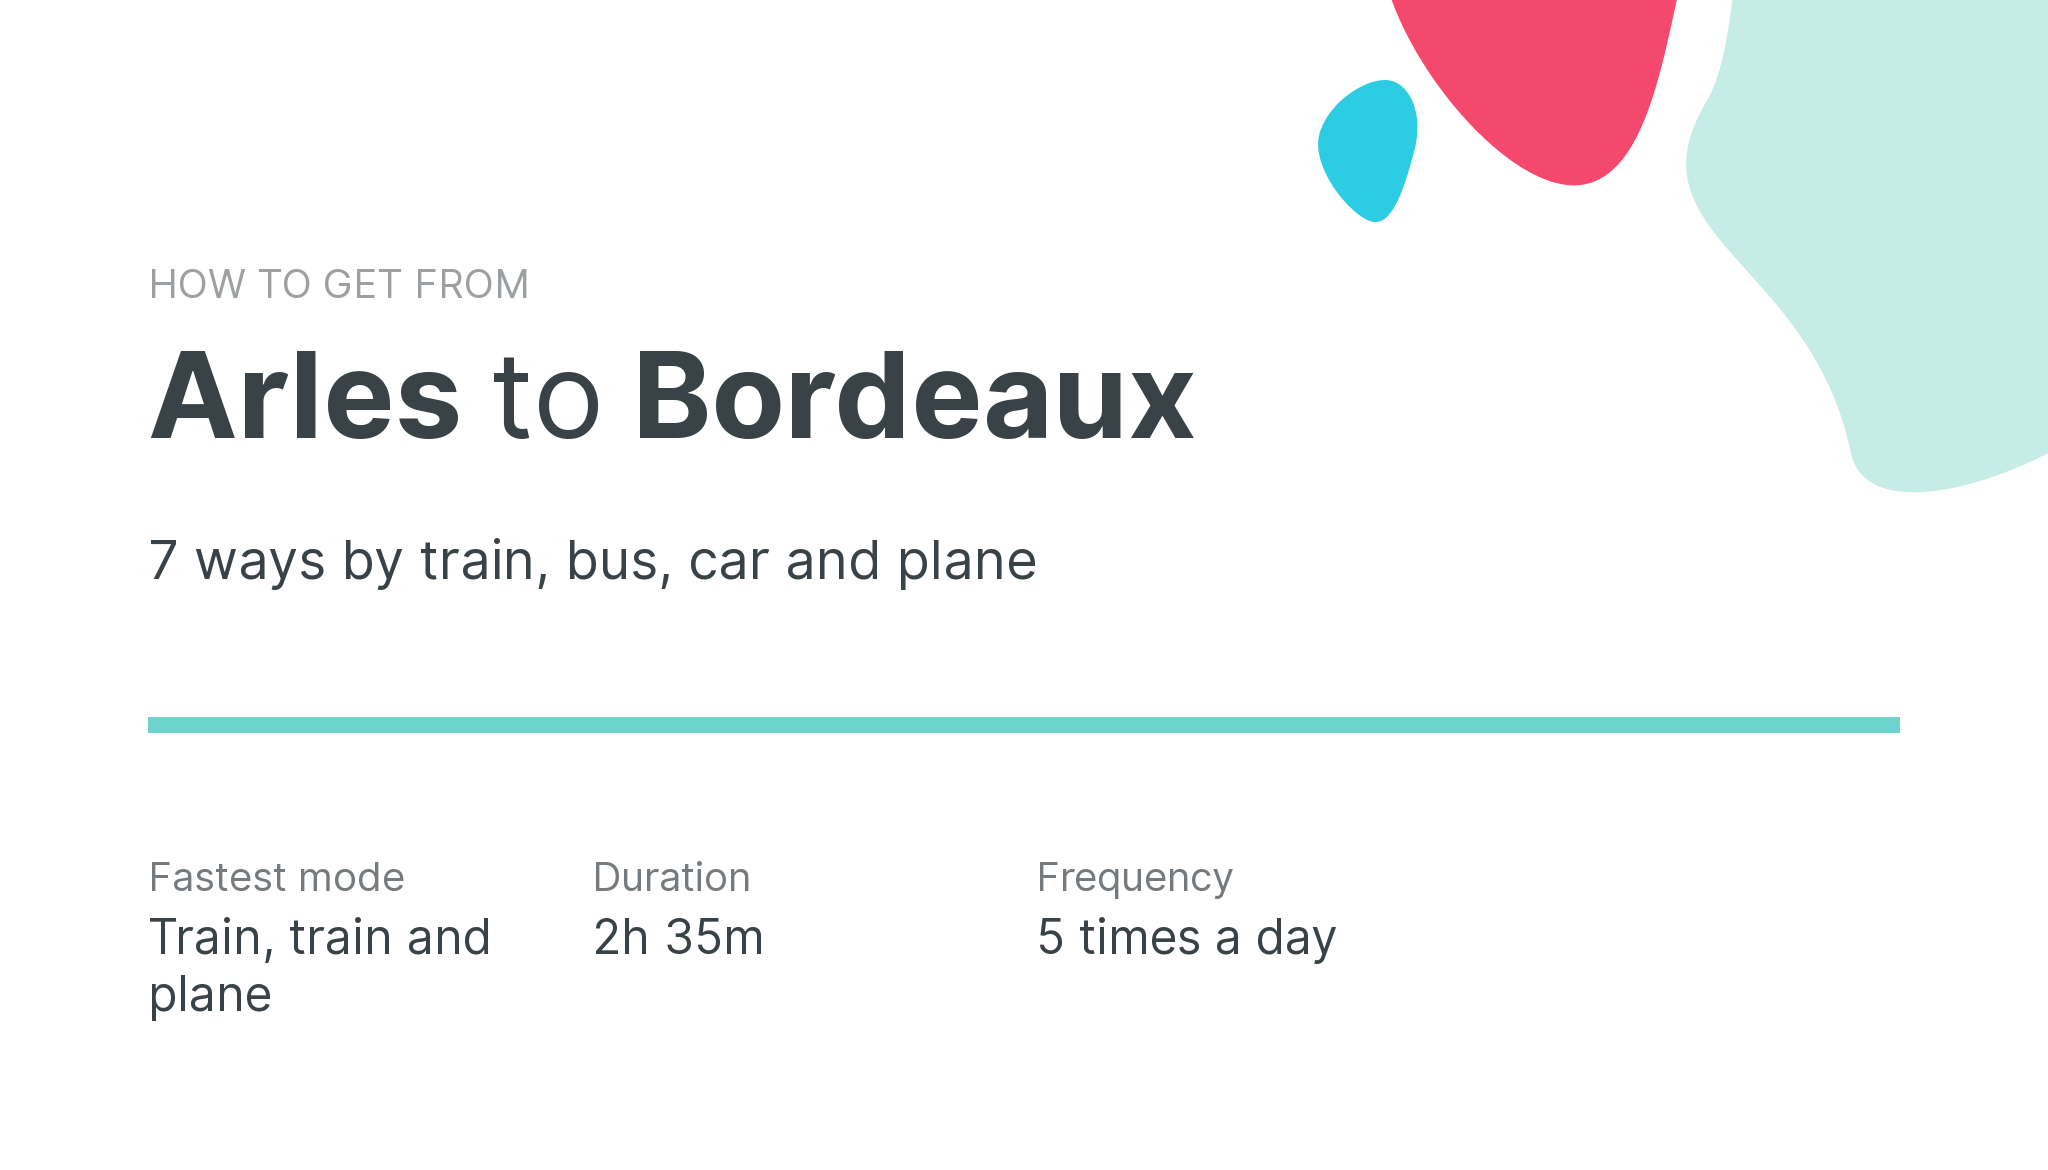 How do I get from Arles to Bordeaux